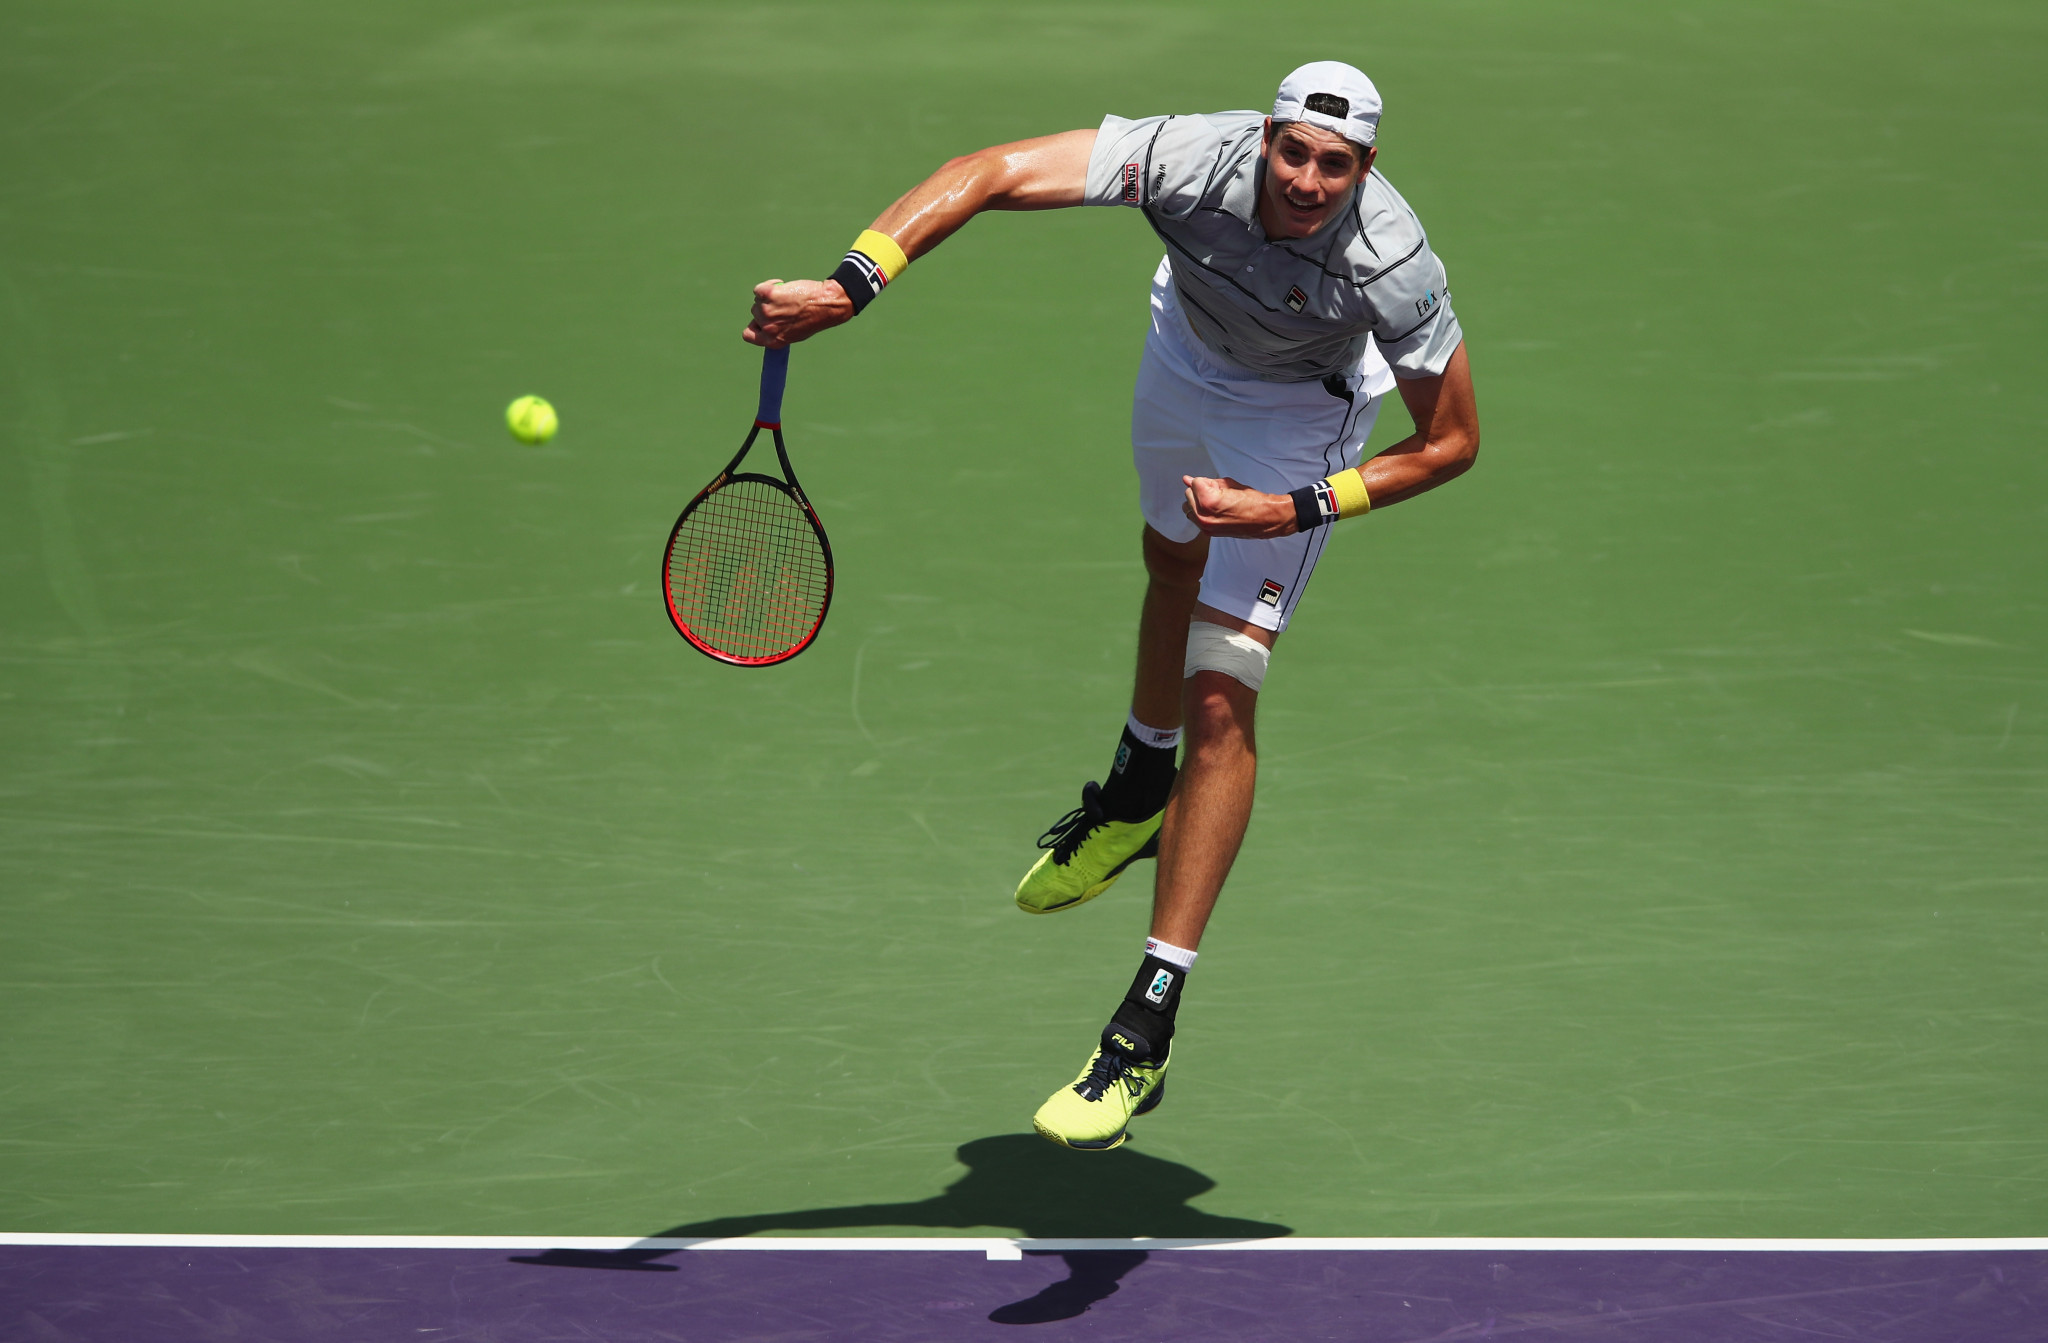 Isner beats second seed Cilic to reach quarter-finals of Miami Open